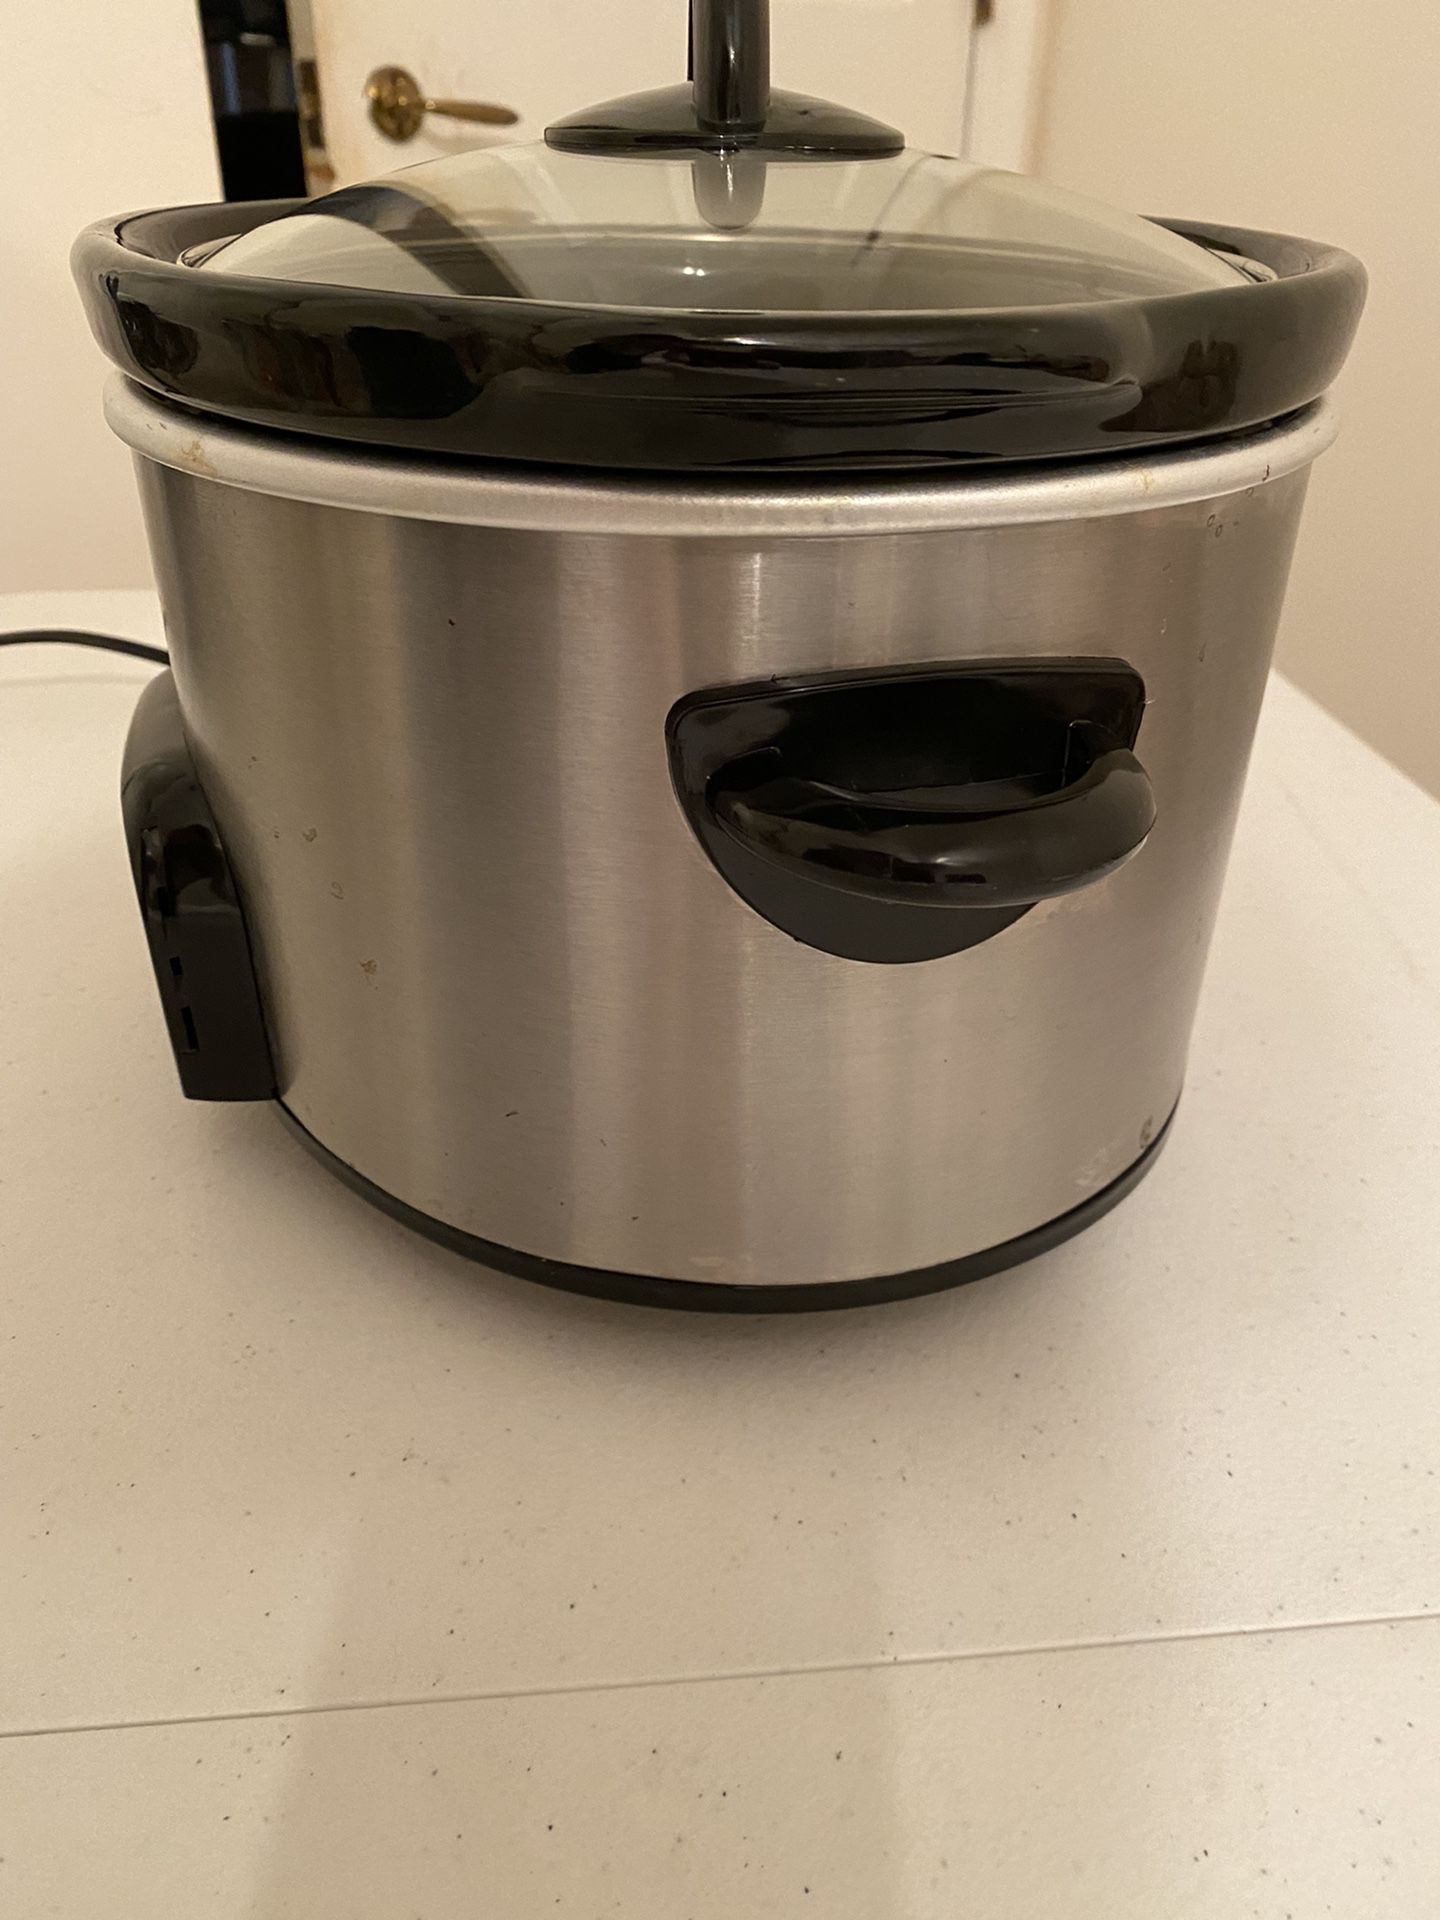 Crock-Pot-B Cook & Carry 6 Quart Programmable Slow Cooker for Sale in  Fairview, TX - OfferUp